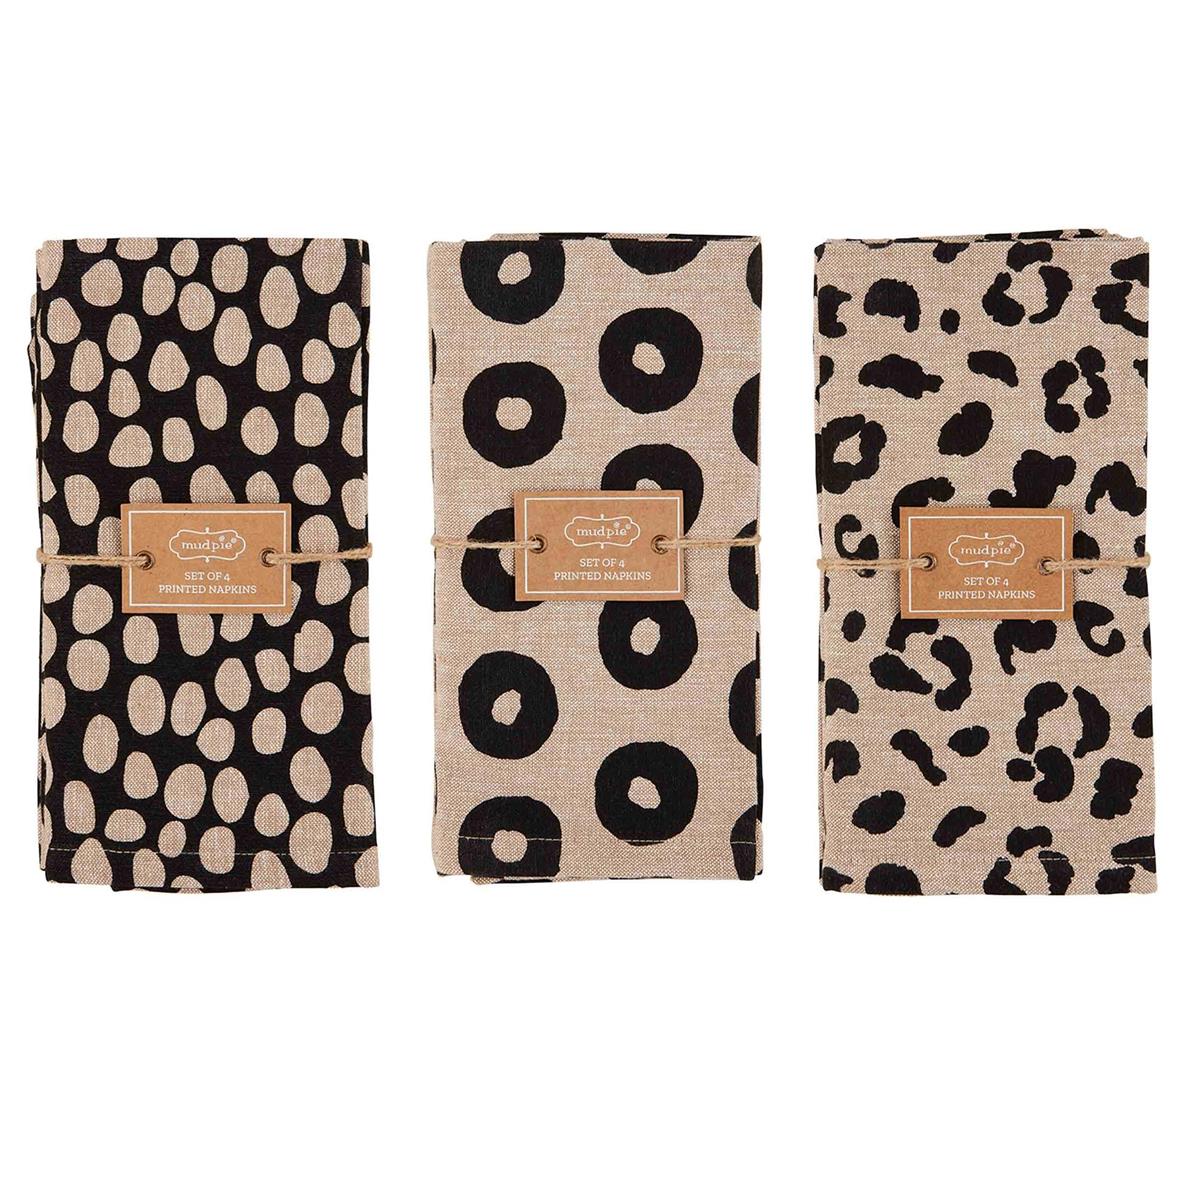 all three styles of animal print napkins folded and wrapped with twine on a white background